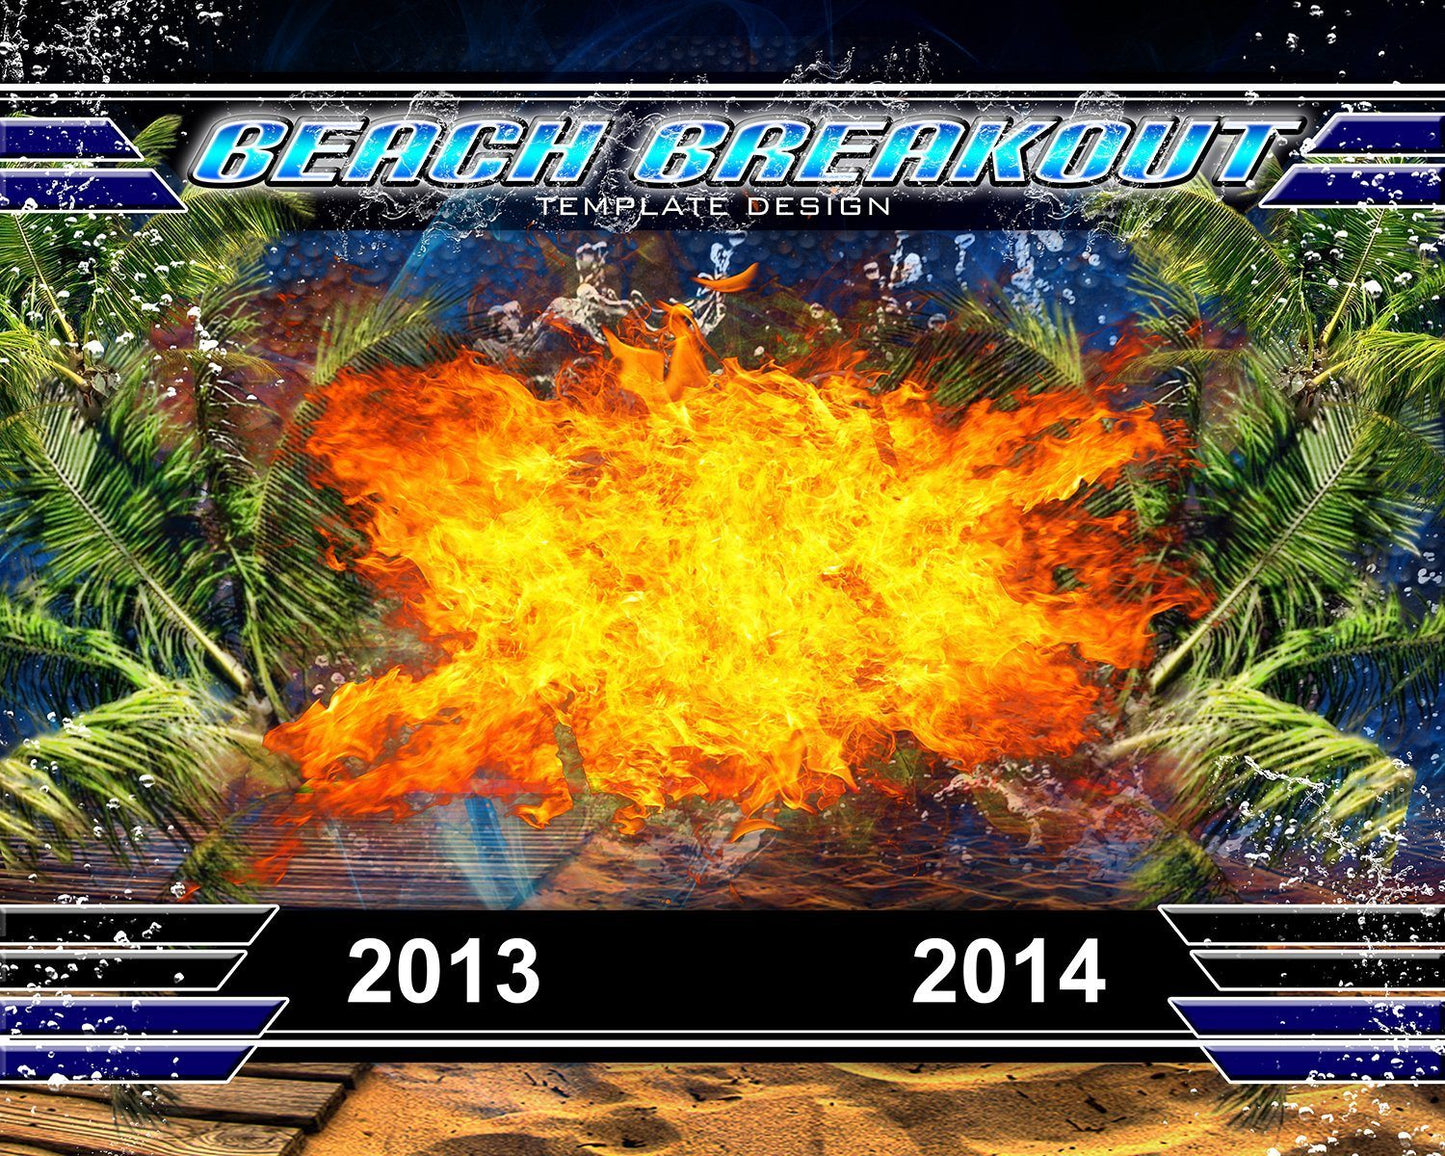 Beach Breakout v.3 - Xtreme Team-Photoshop Template - Photo Solutions